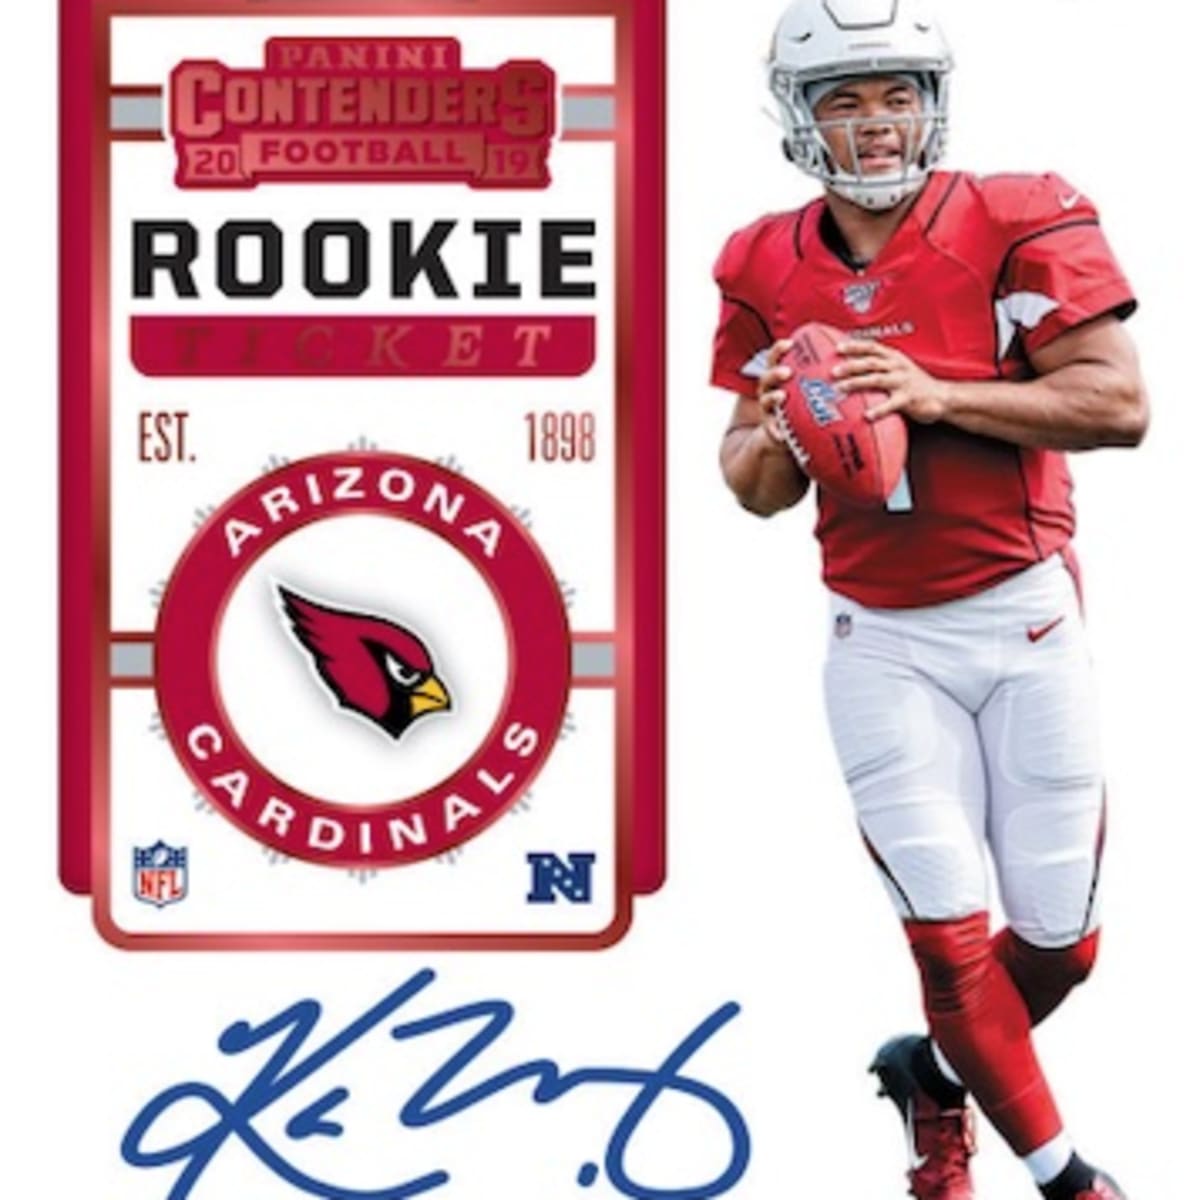 Panini Contenders - Sports Collectors Digest